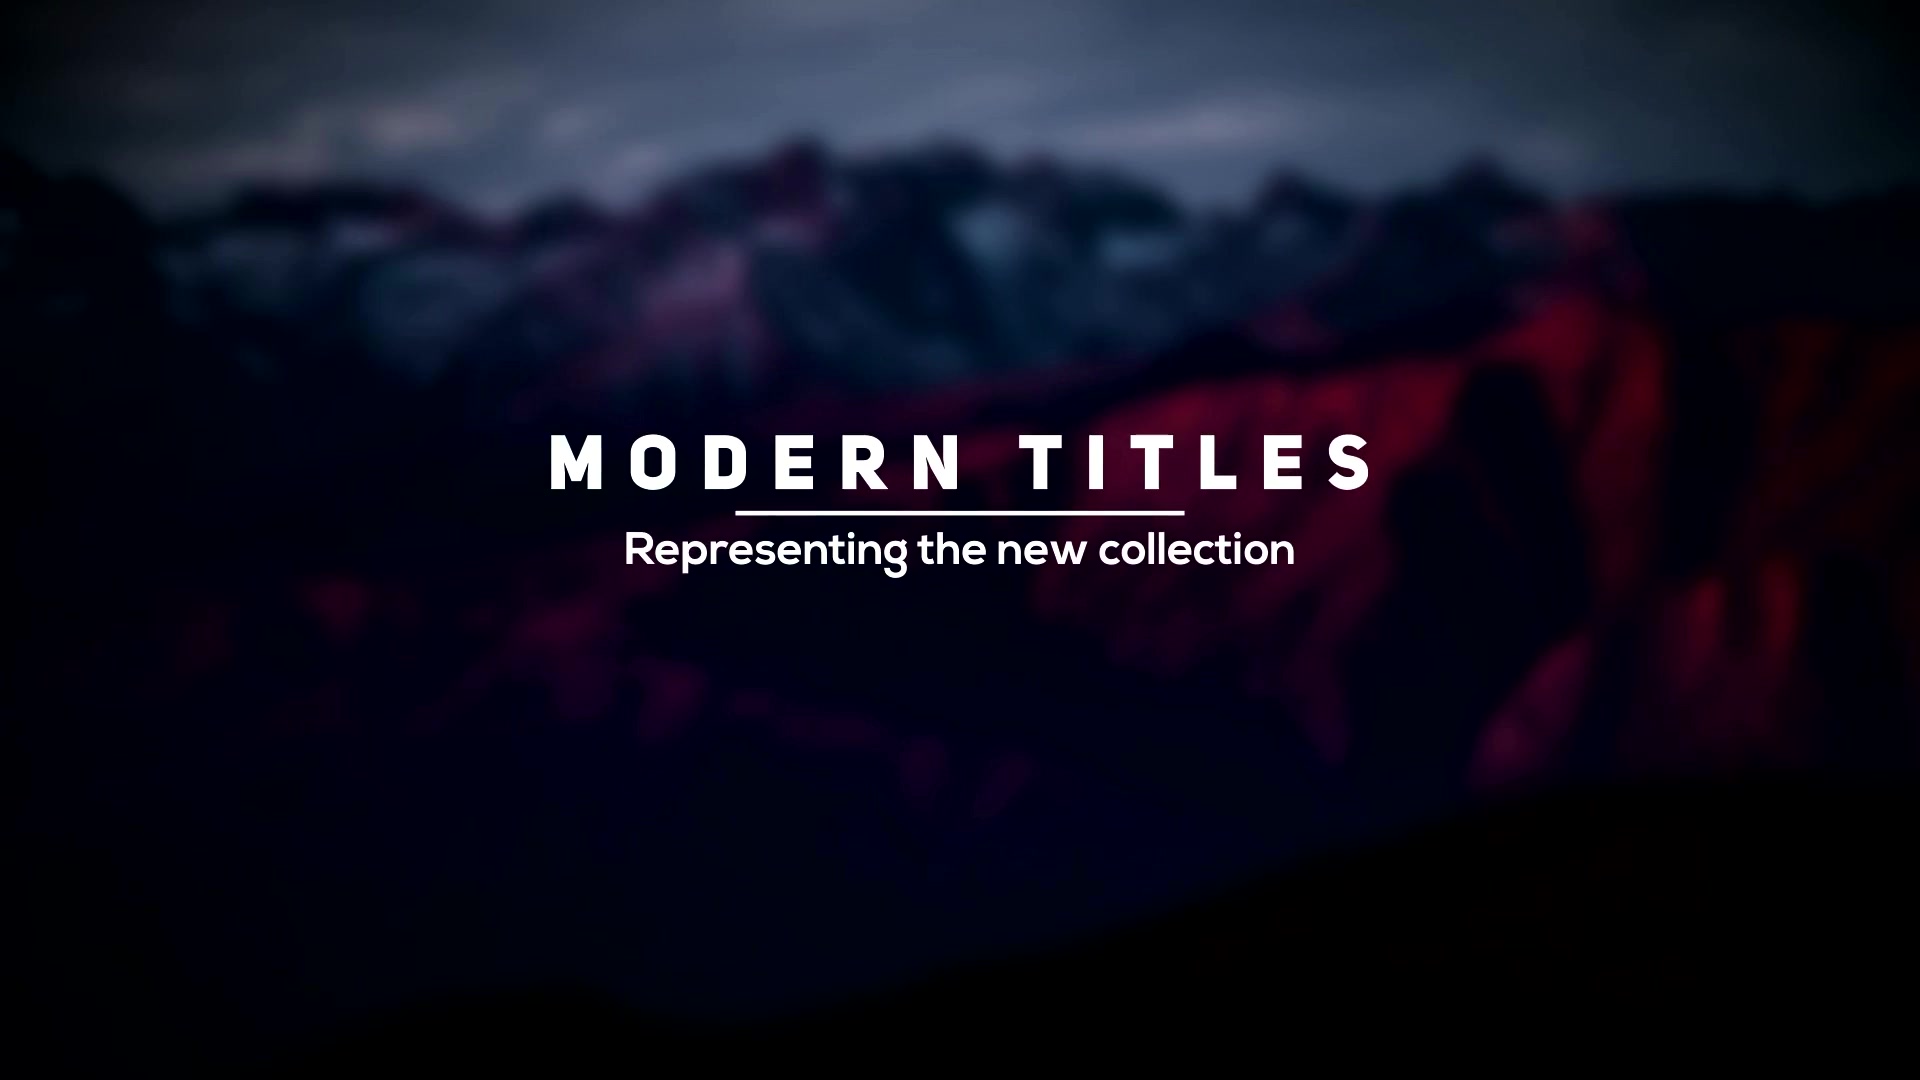 Modern Intro Titles Pack lll for Premiere Pro - Download Videohive 22550389